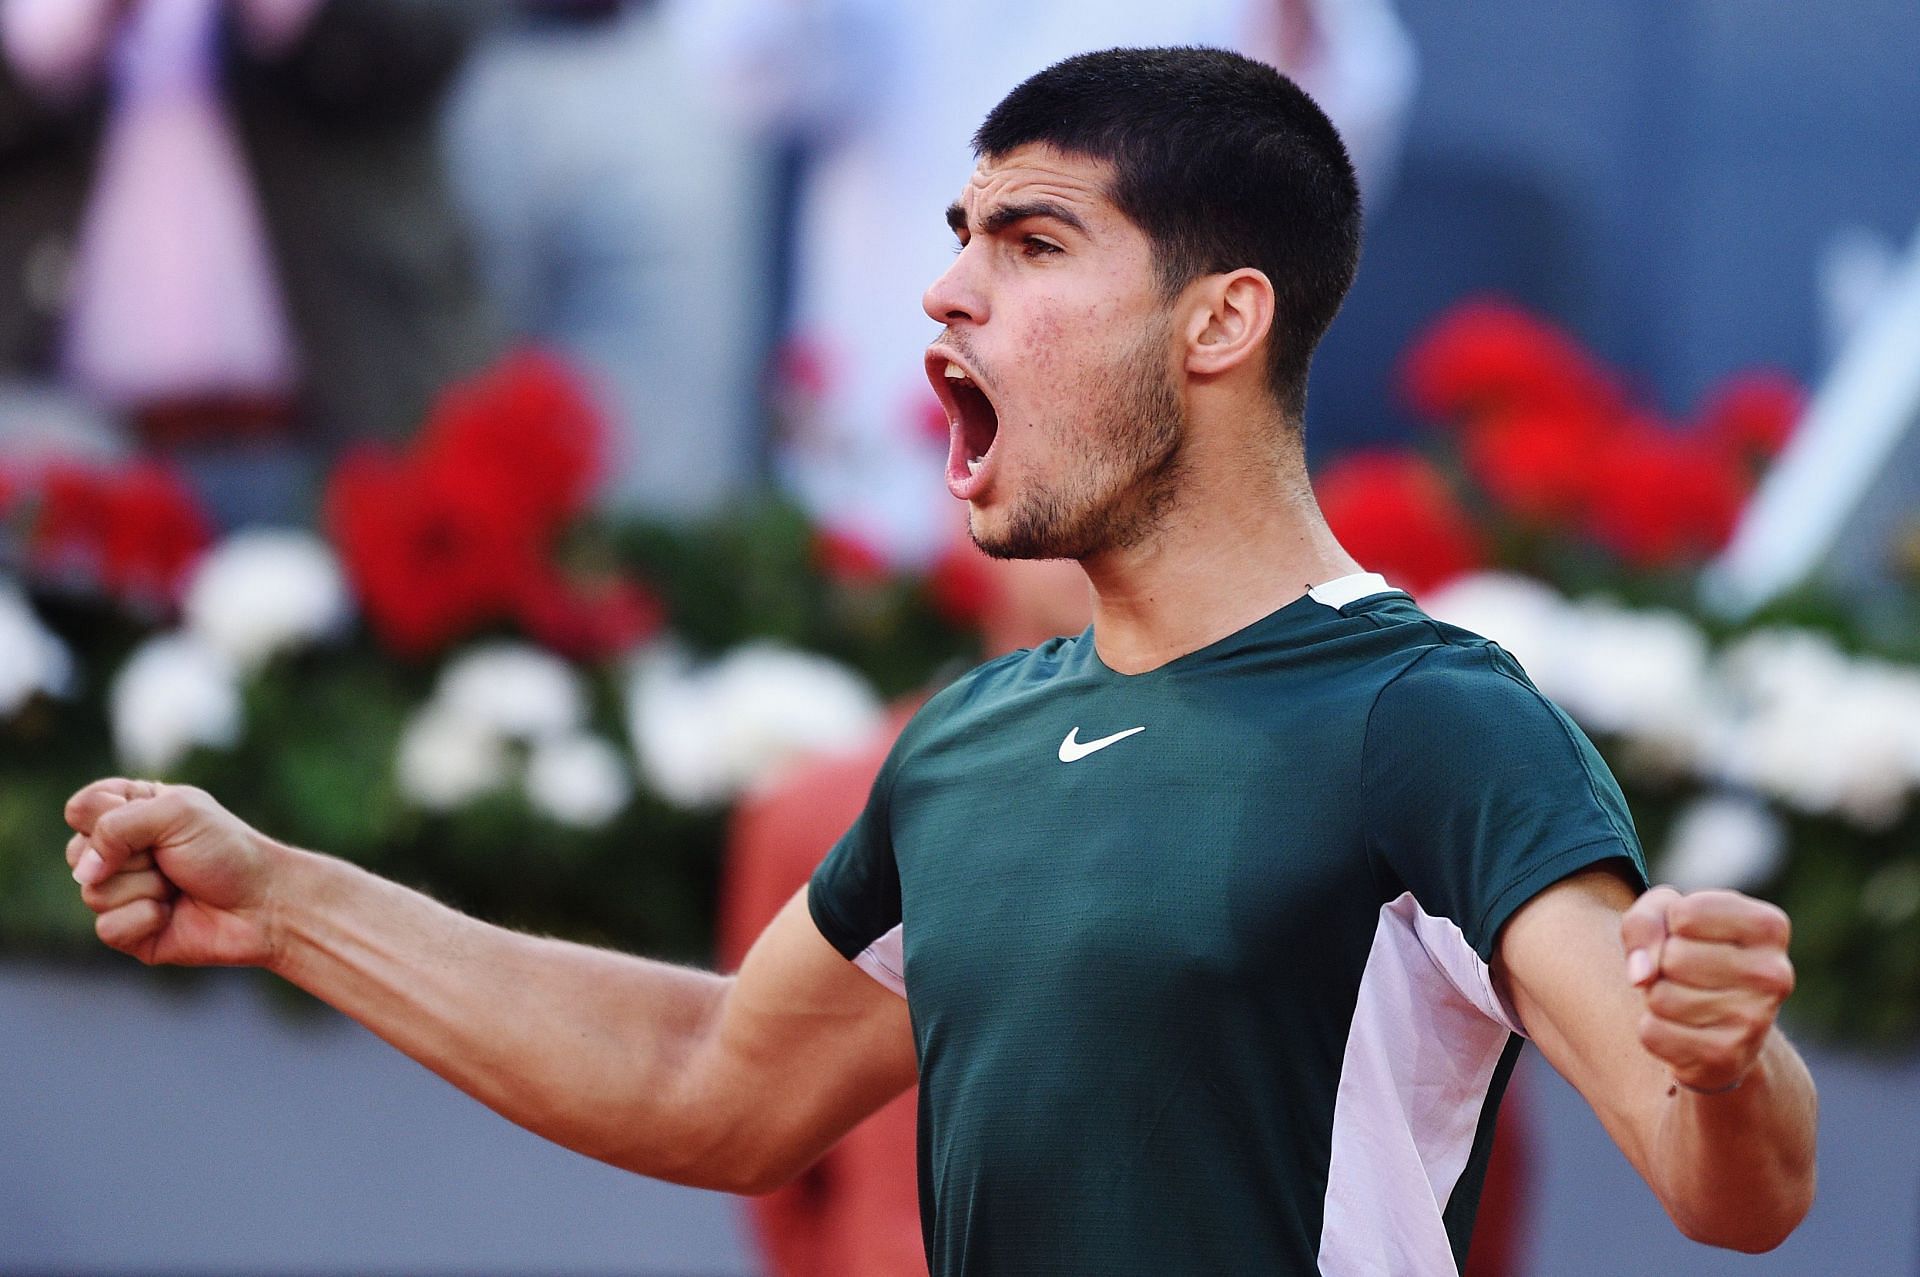 Carlos Alcaraz, 19, becomes the youngest champion in Madrid after dethroning Alexander Zverev in the final.